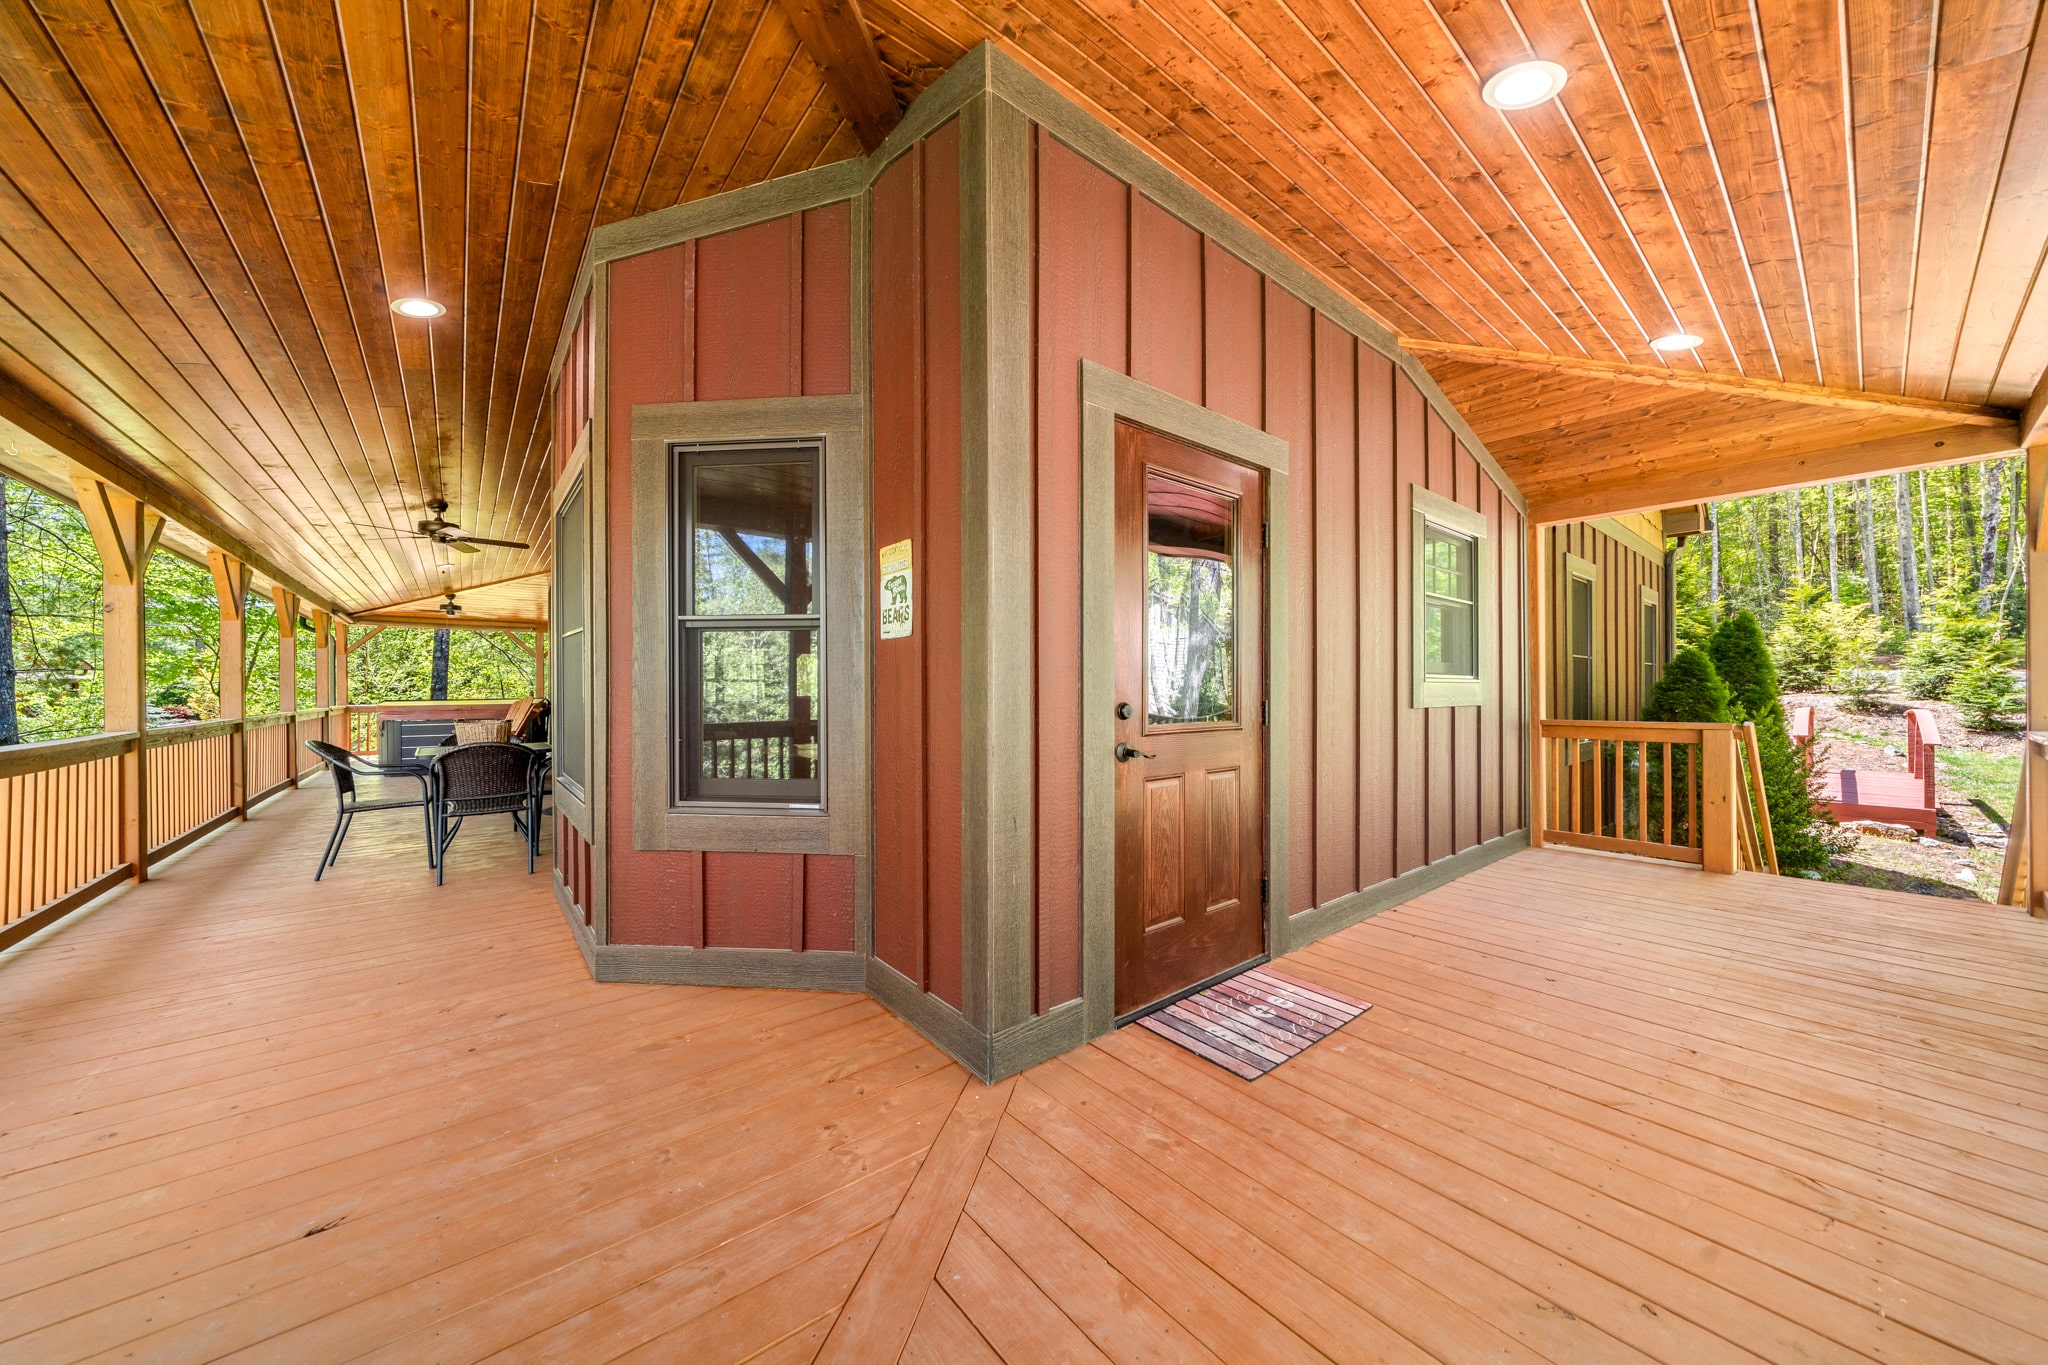 Wraparound Porch at the Mountain Laurel Cabin - Asheville Country Cabins Vacation Rentals